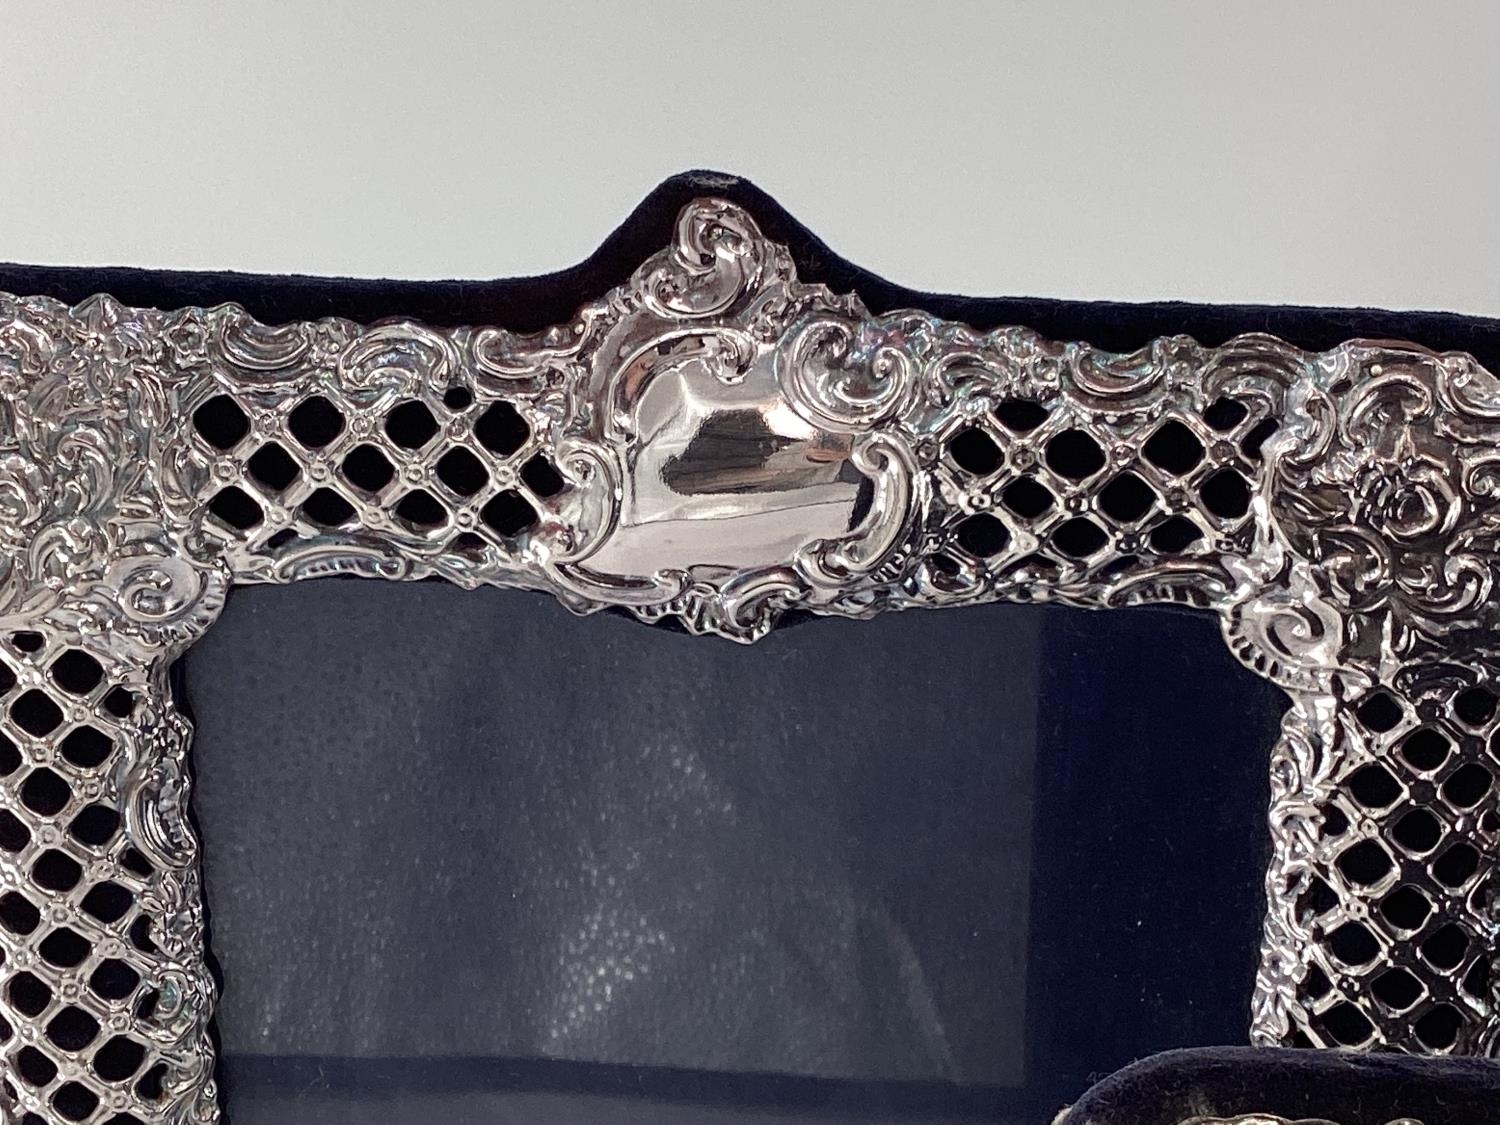 Trio of Sterling silver picture frames with pierced decoration by Keyfold Frames, Ltd, London - Image 5 of 10